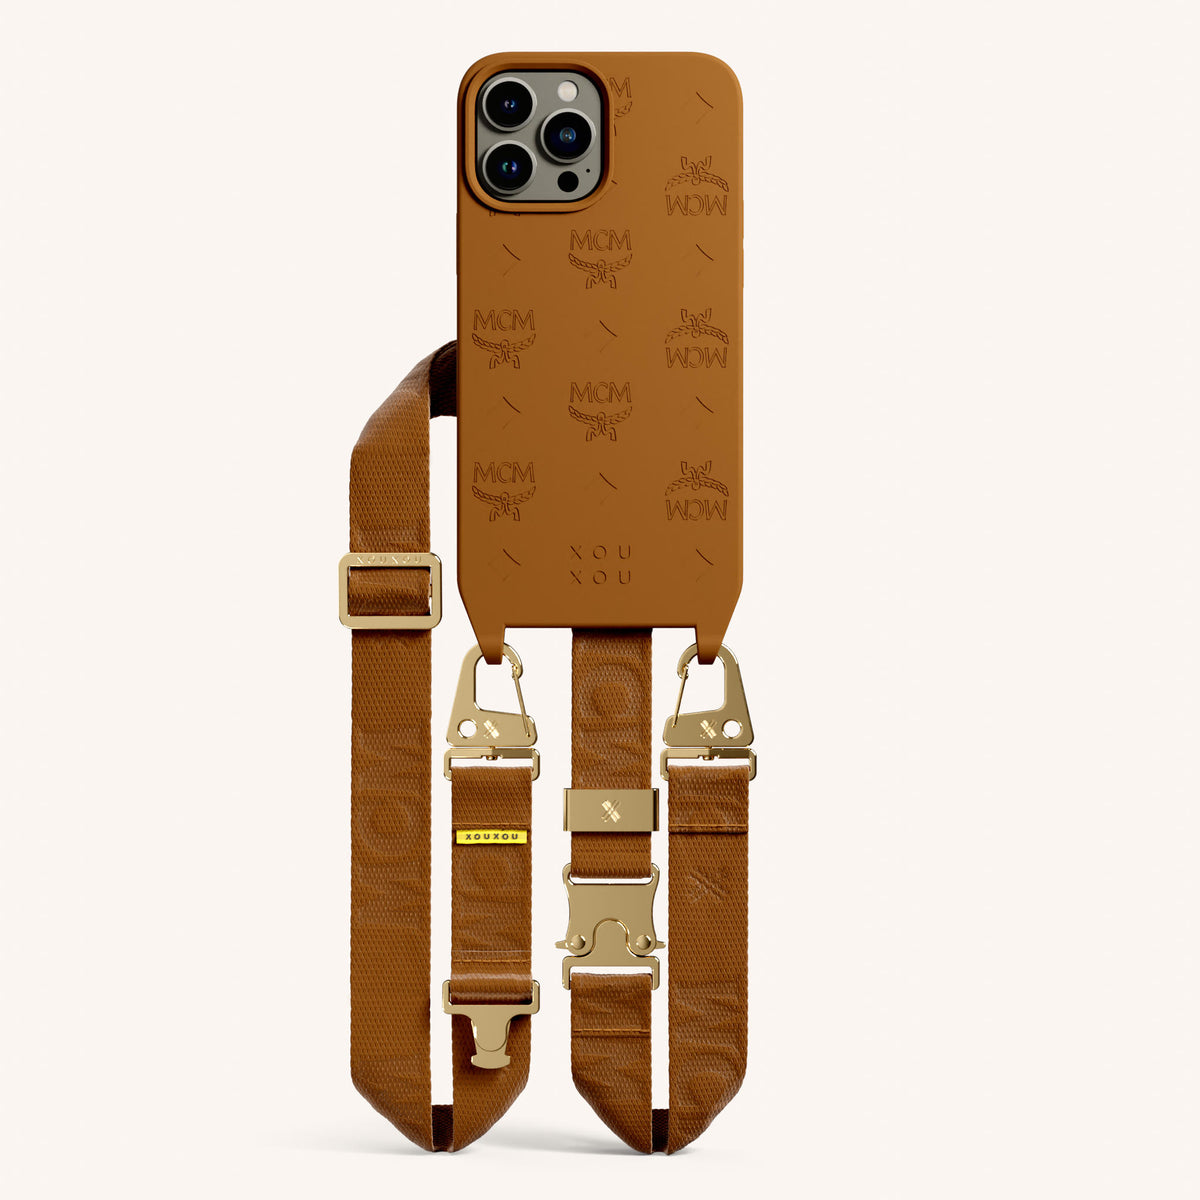 MCM x XOUXOU Phone Necklace for iPhone 13 Pro Max with MagSafe in Cognac Total View | XOUXOU #phone model_iphone 13 pro max